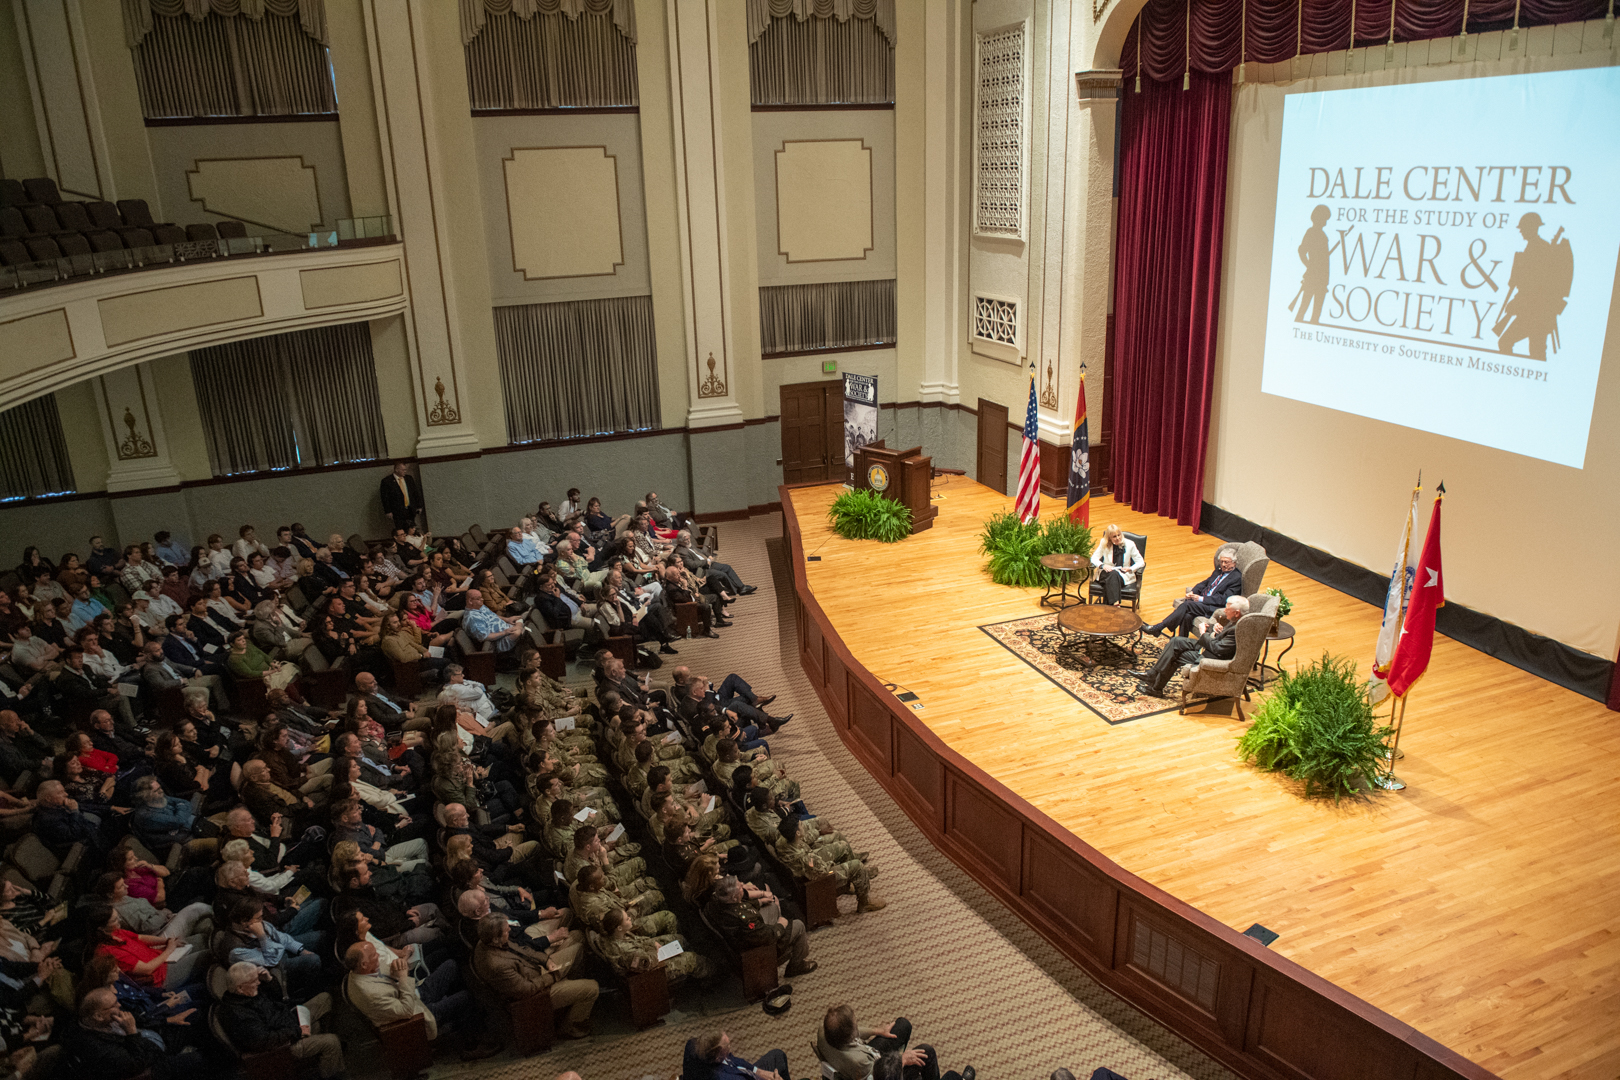 Blount, Koppel Share Reflections on         Legacy of Operation Iraqi Freedom During Dale Lecture Event at USM